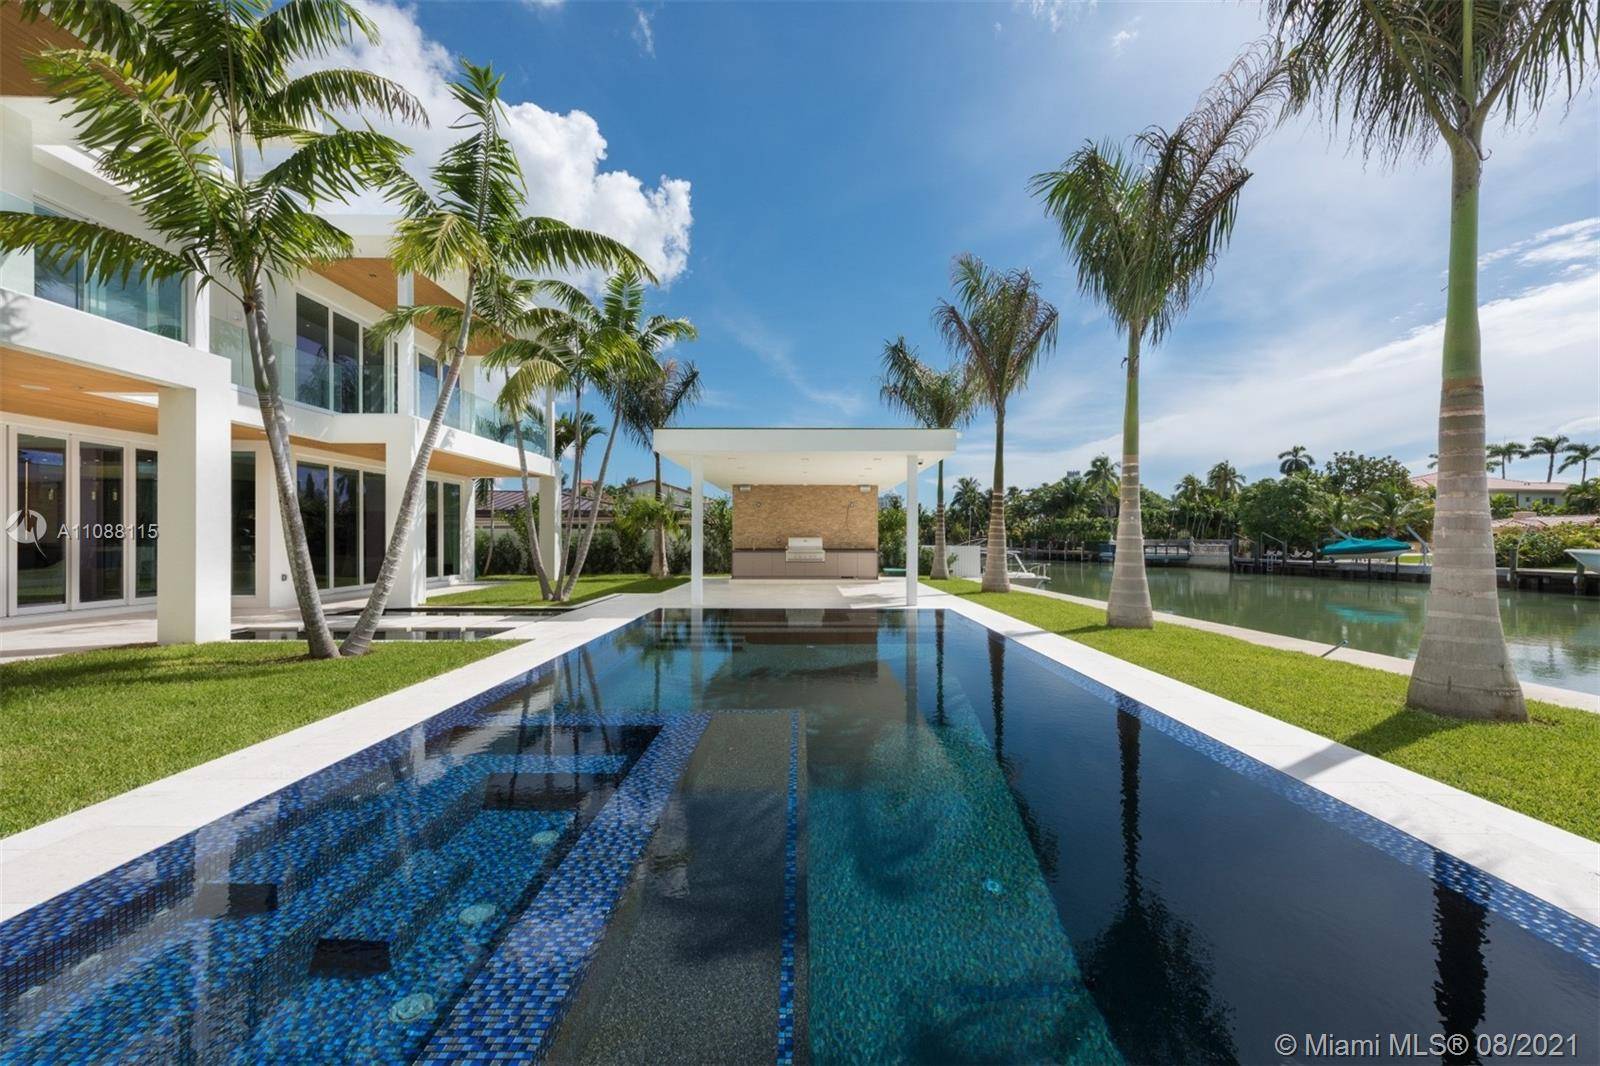 Modern Waterfront Smart Home located in the heart of Miami Beach.